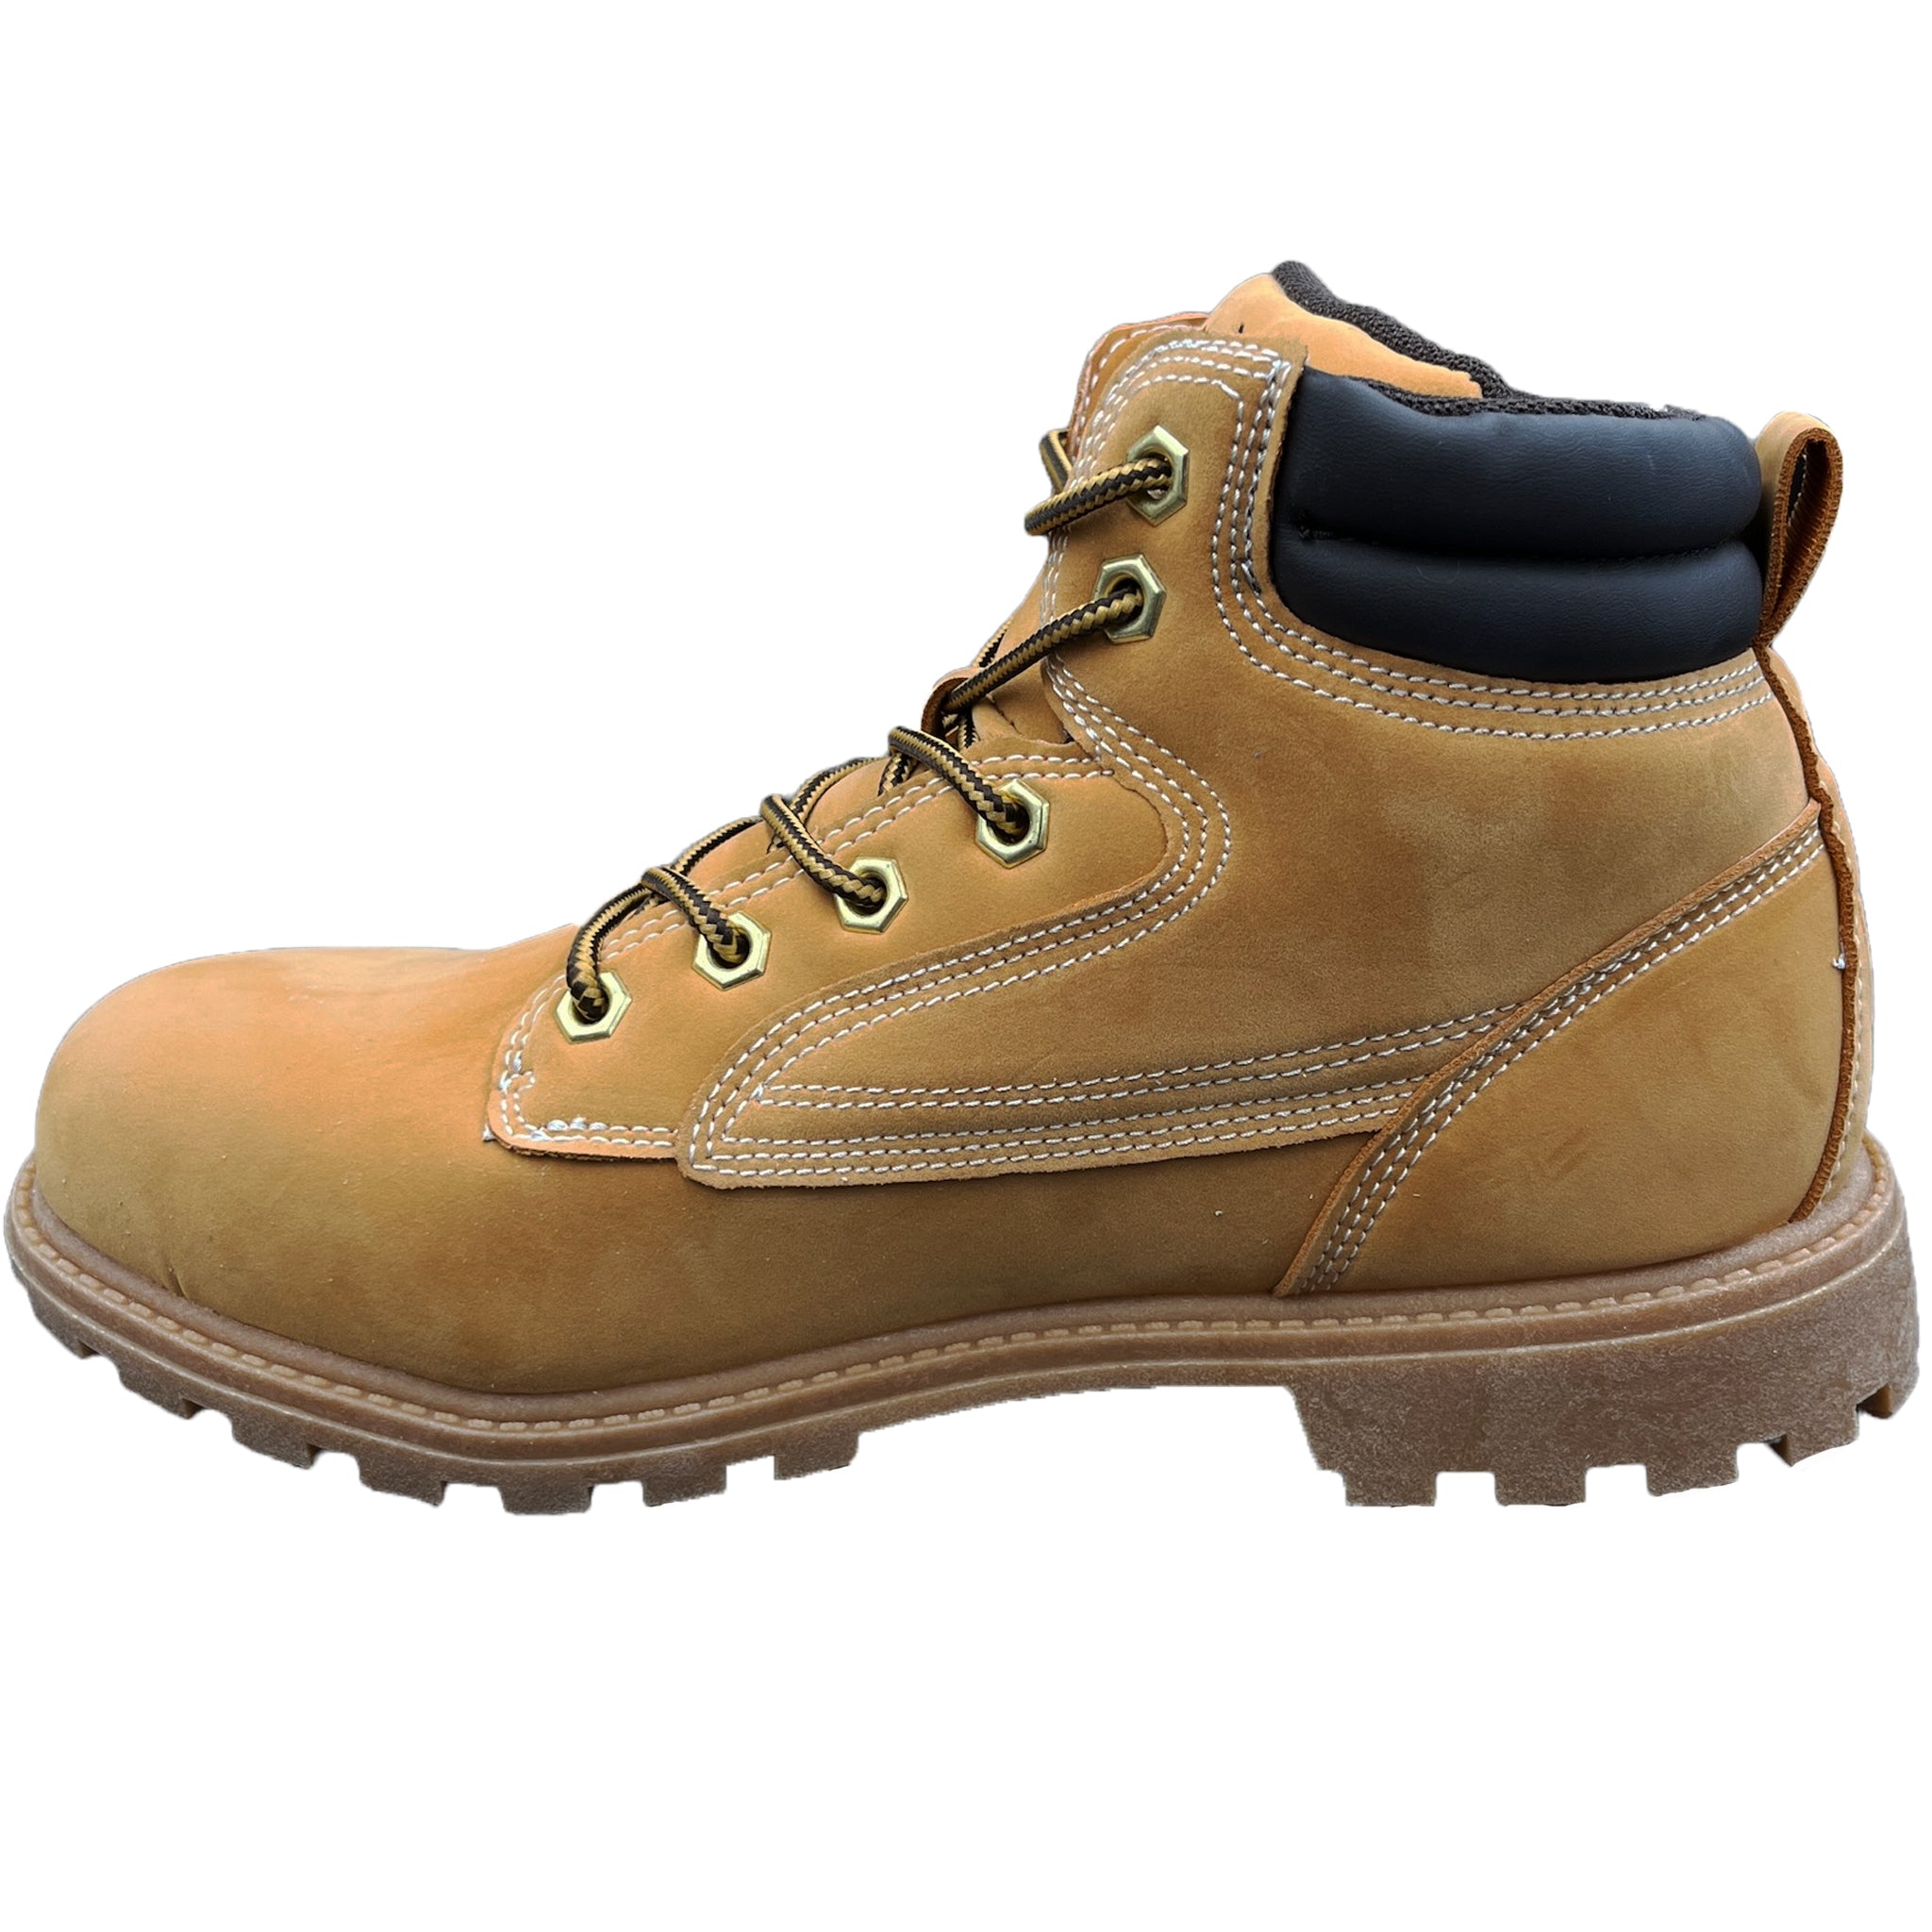 Fila Men's Landing Soft Toe Work Boots – That Shoe Store and